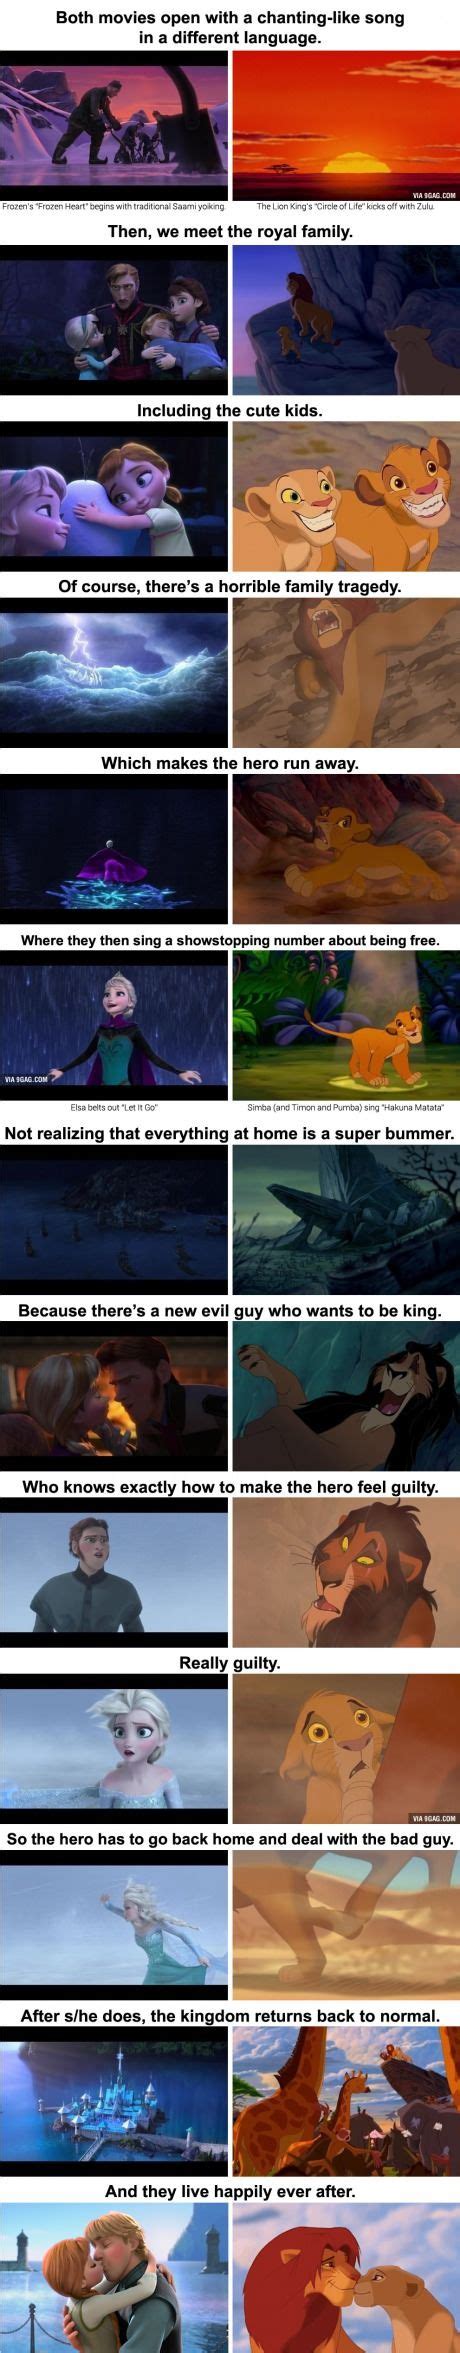 Here Is Definitive Proof That Frozen Is Literally The Same Movie As